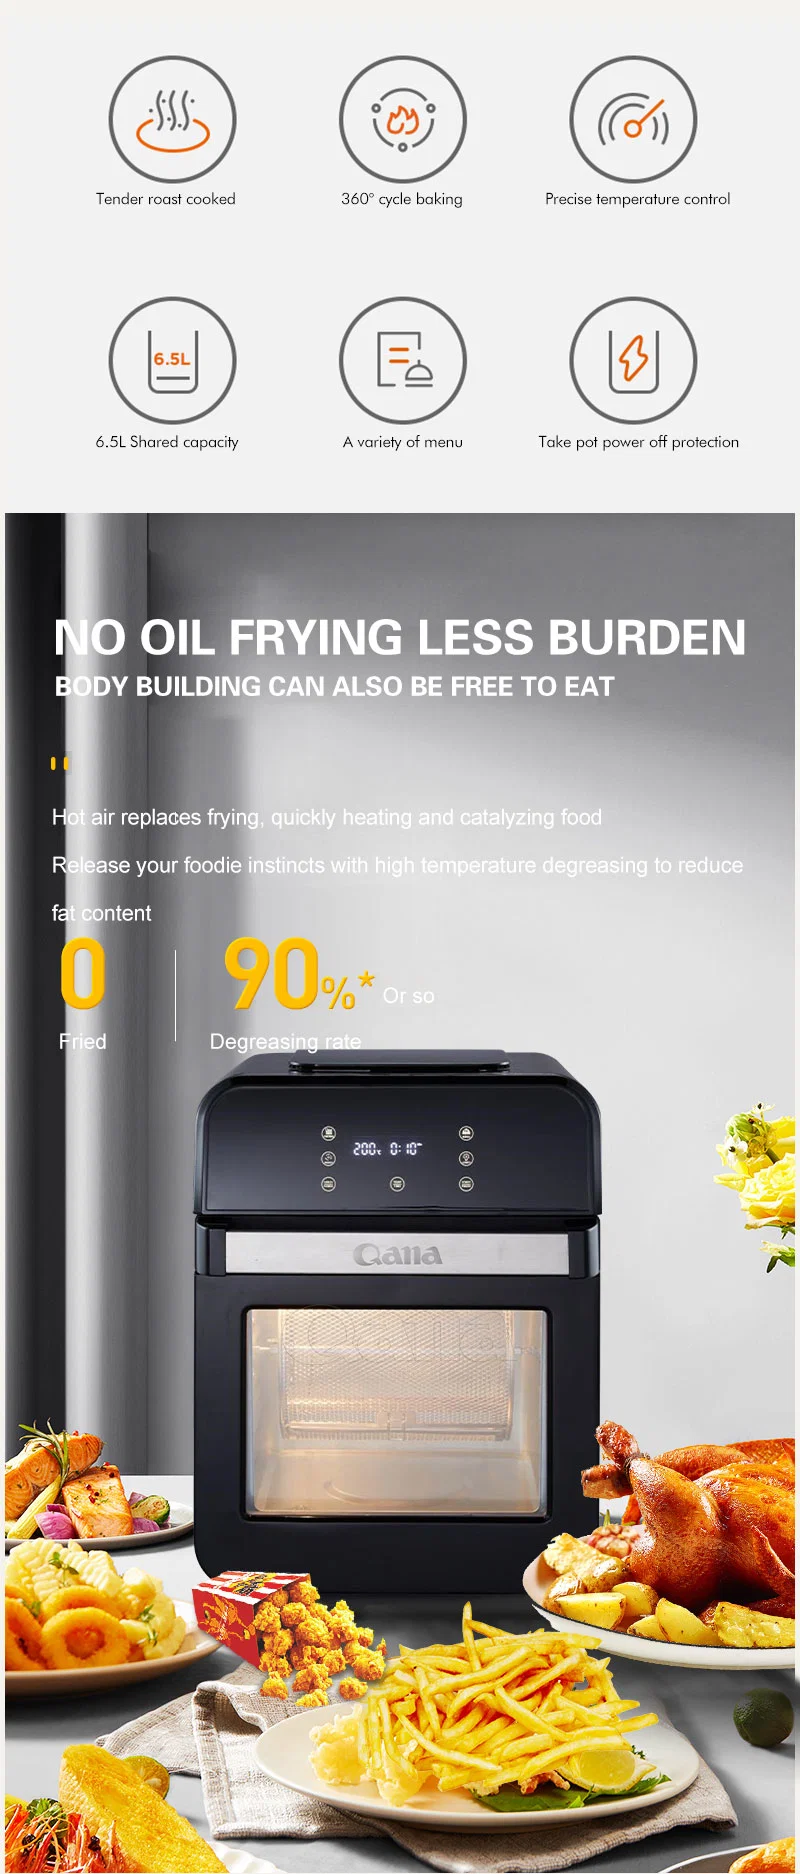 Qana Wholesale 12 L Multifunctional Big Capacity Hot Air Oven Without Oil Electric Digital Air Fryer Oven with Grill